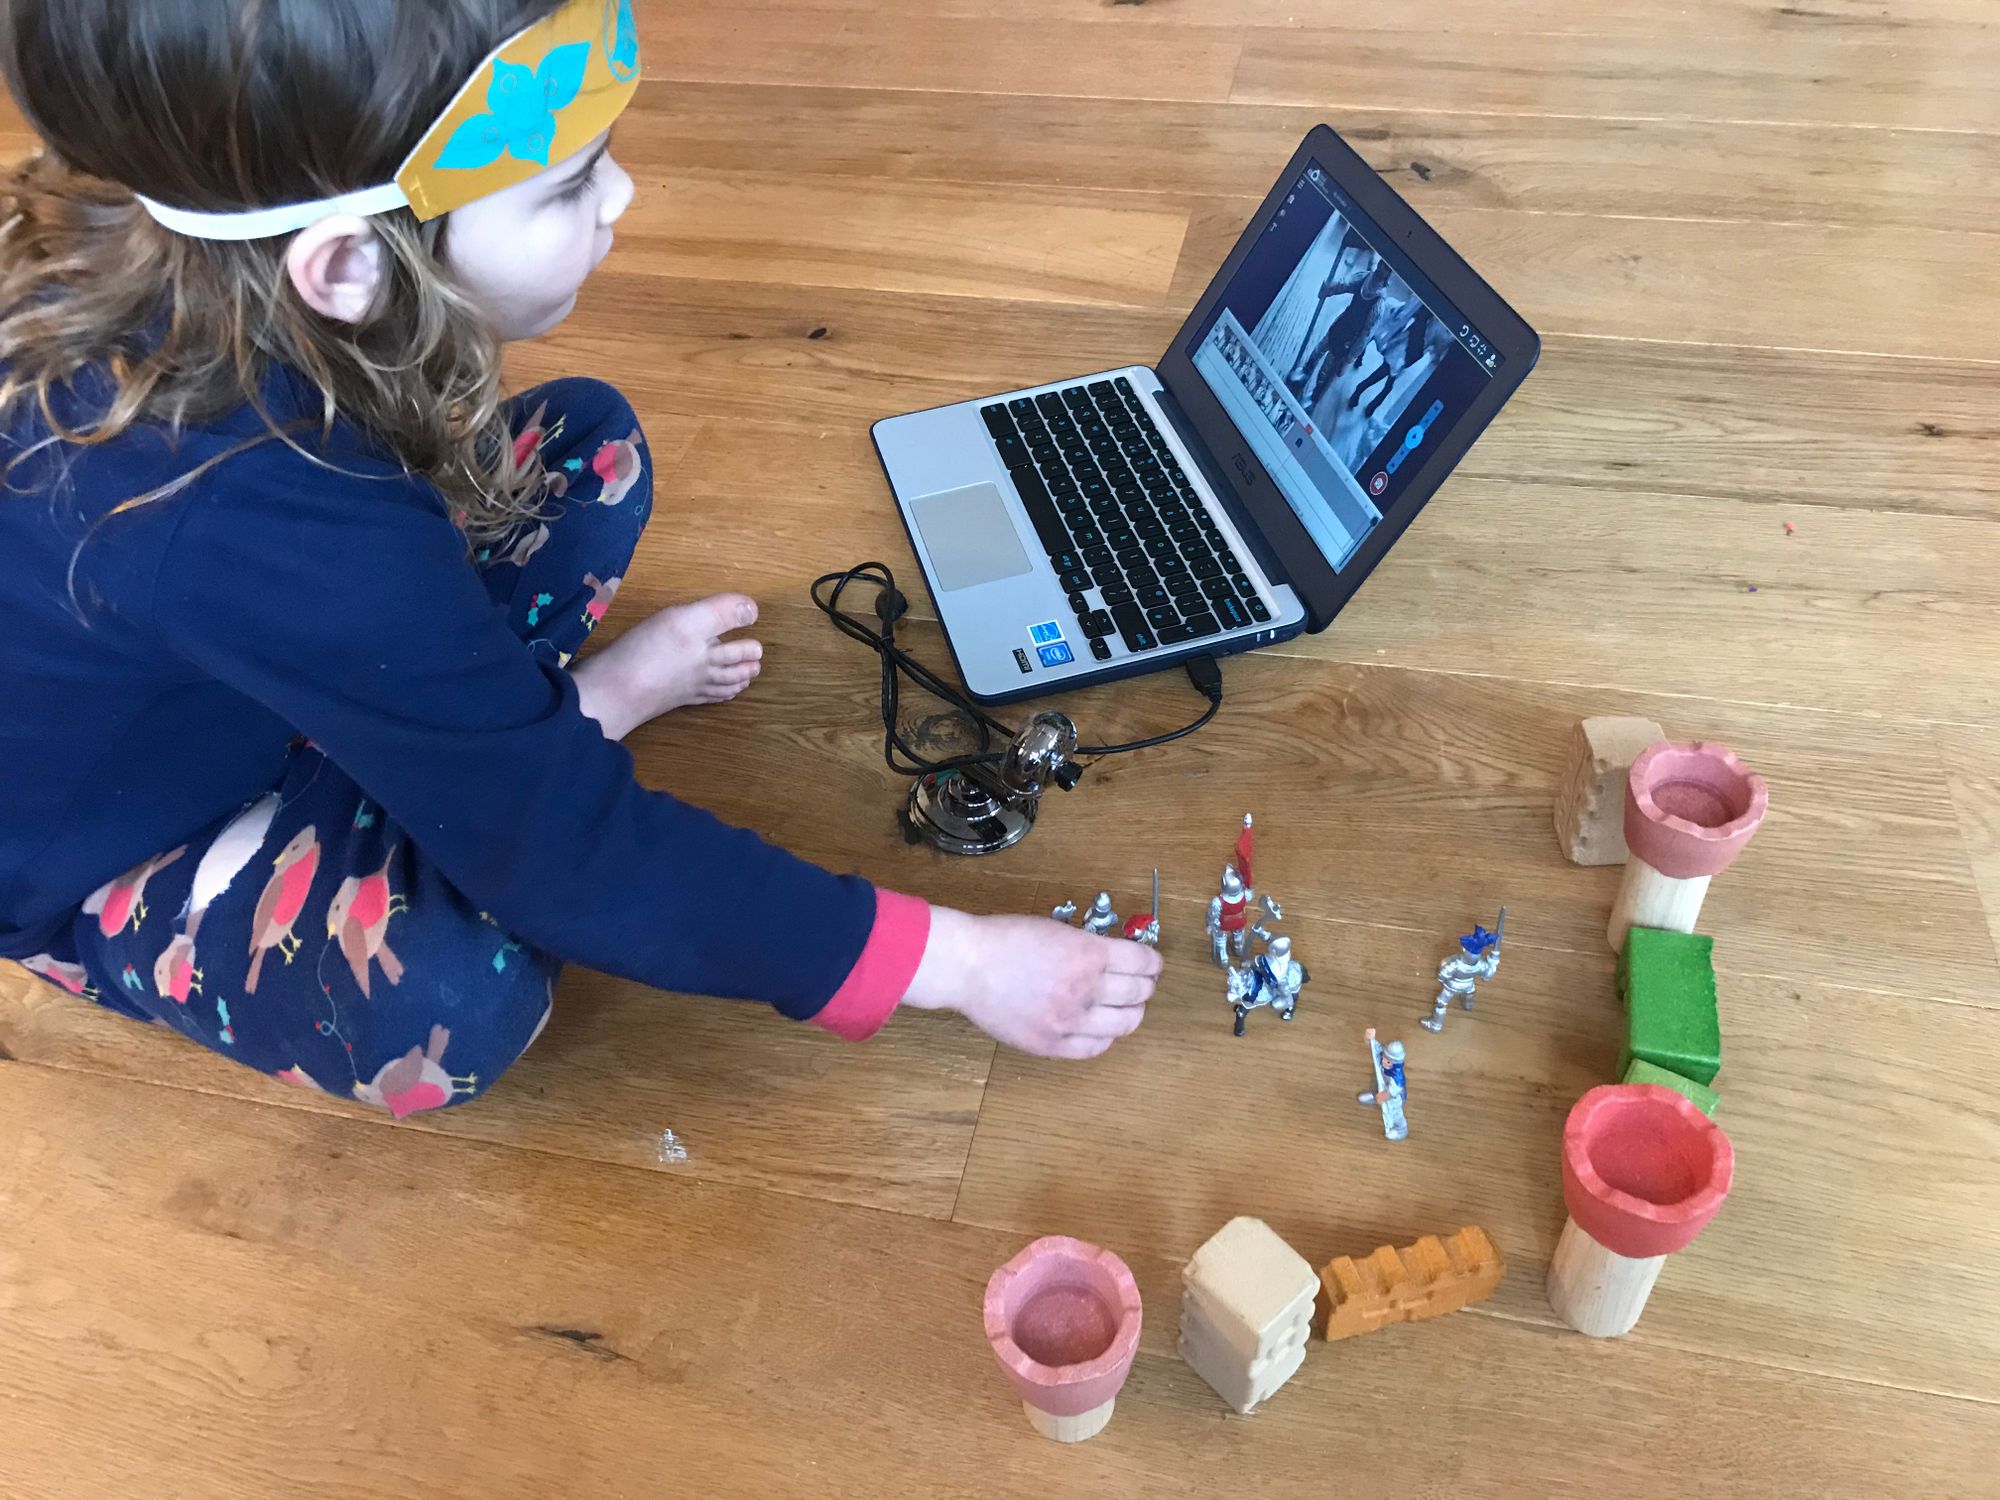 Young child animating models on the floor with a Chromebook and webcam